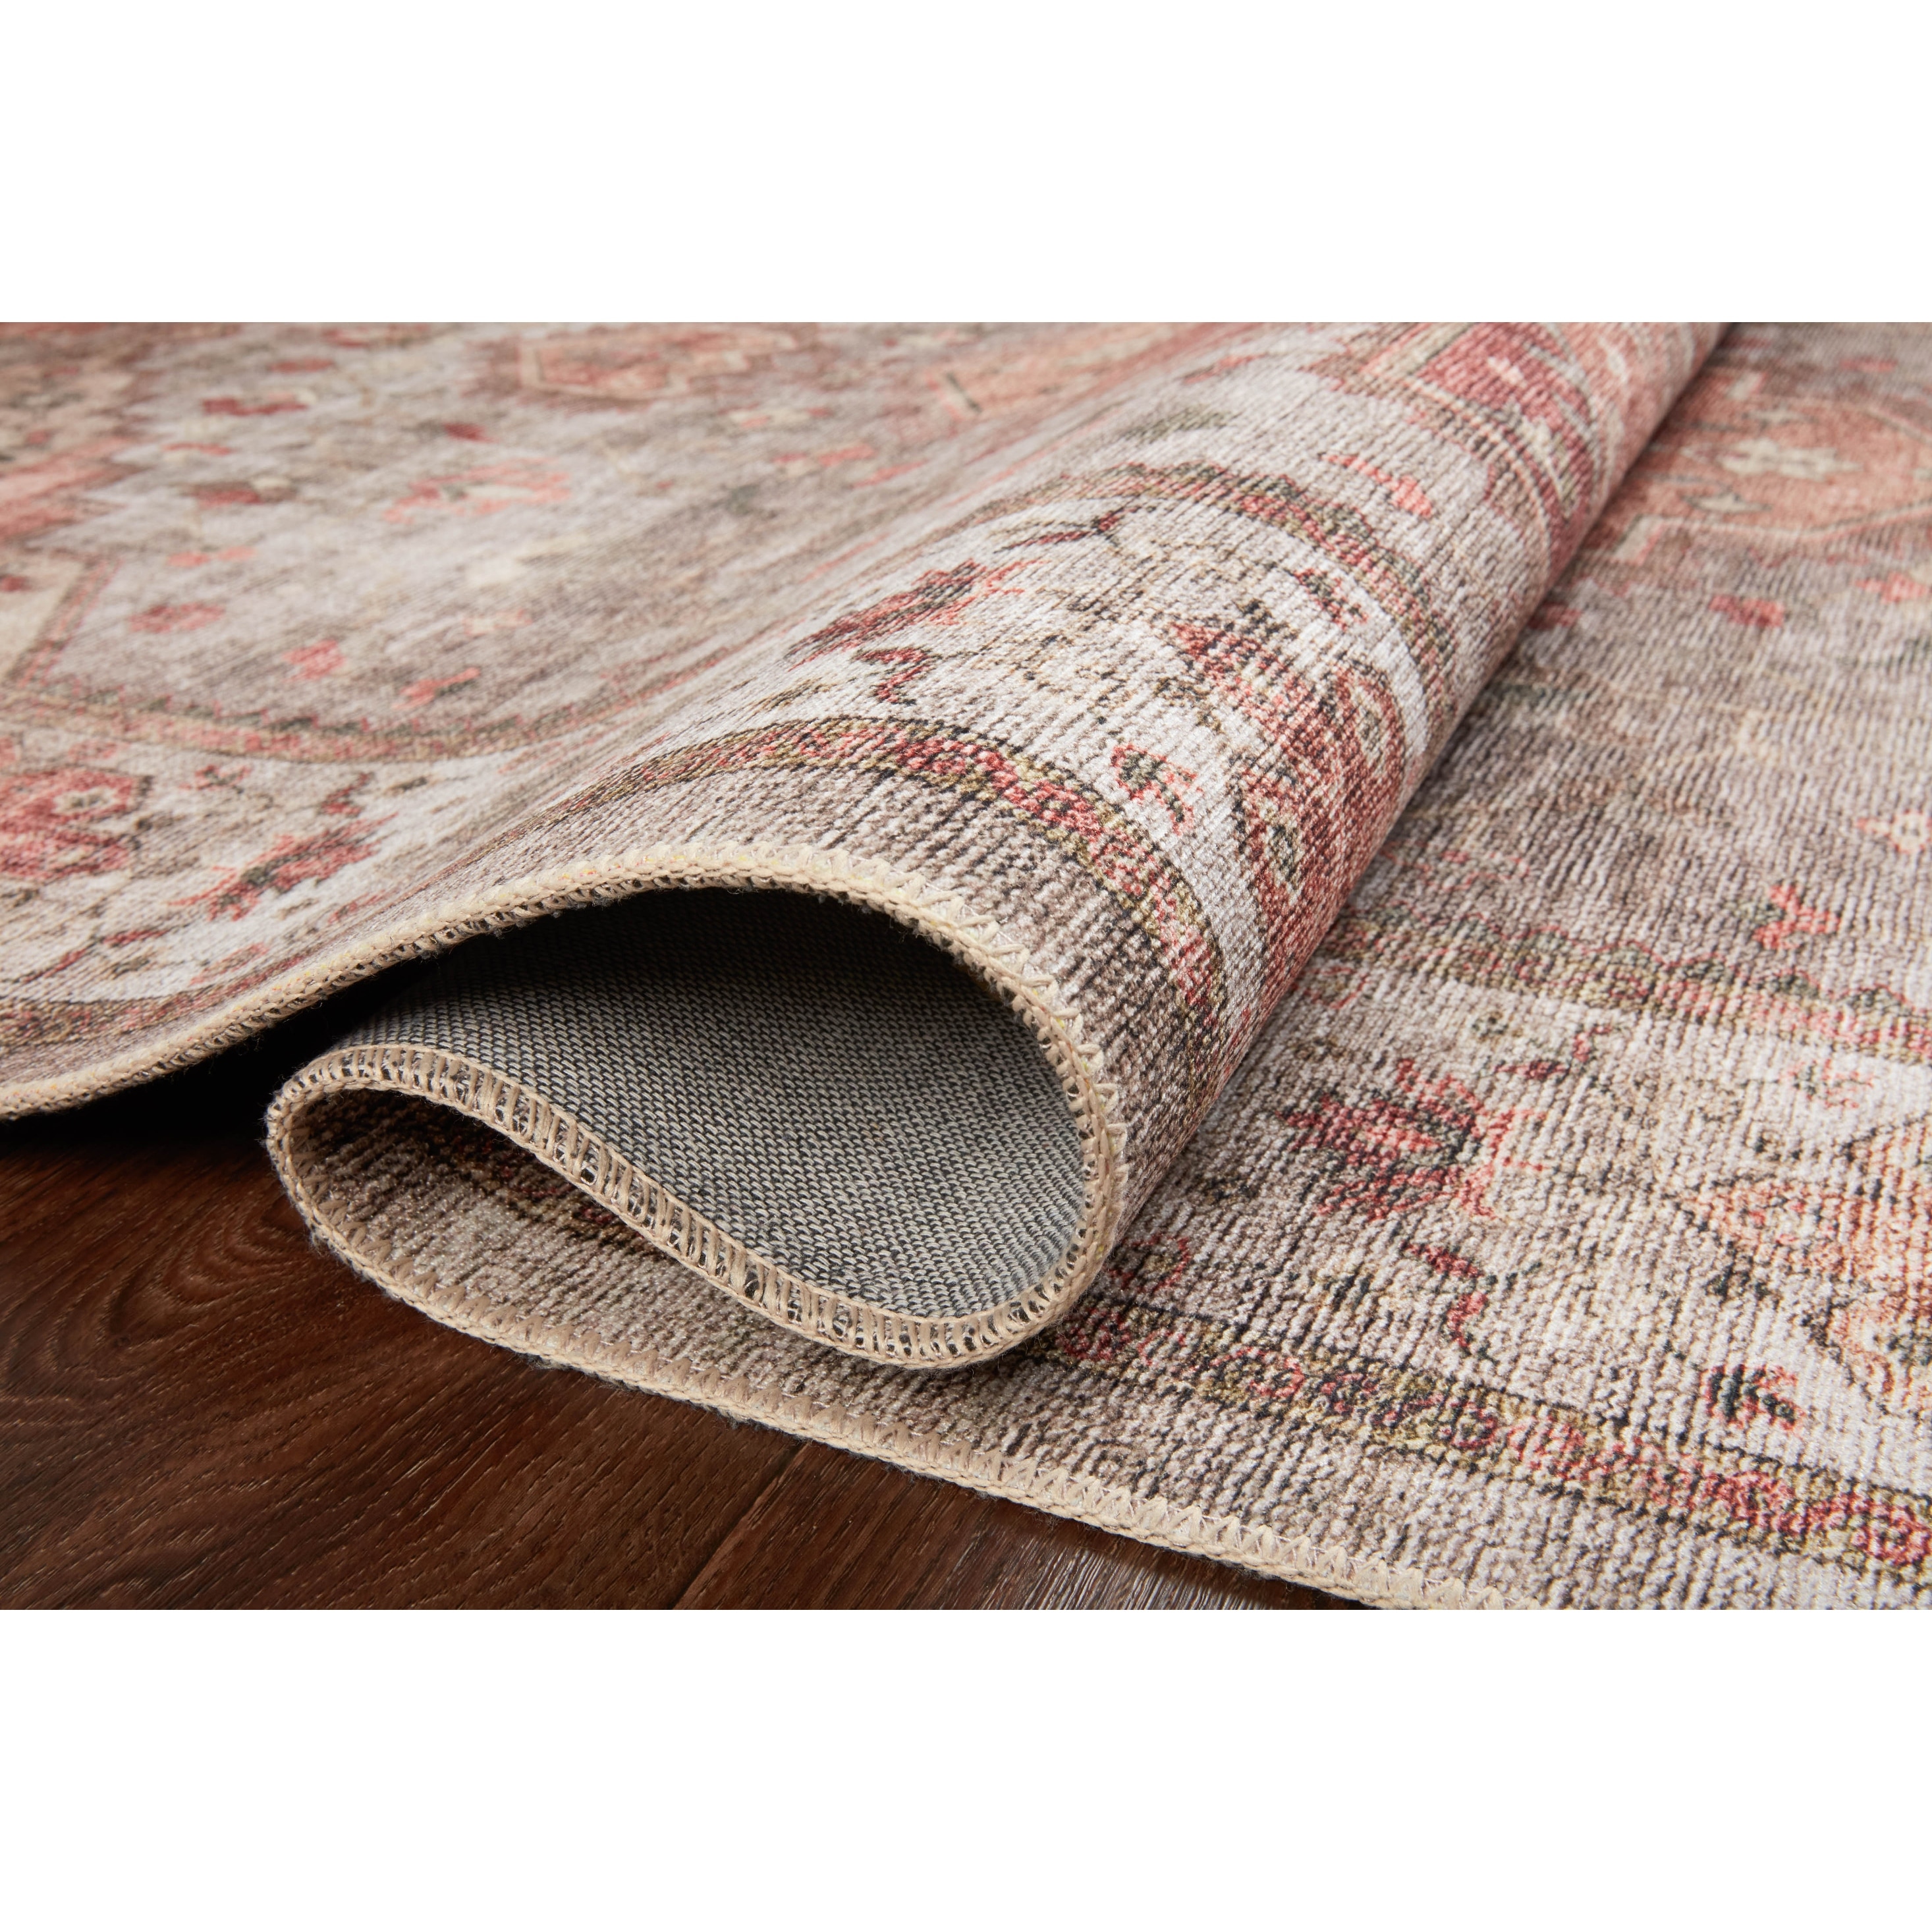 https://ak1.ostkcdn.com/images/products/is/images/direct/7ebf536515552eb44ca98fa1546e1a08e995c811/Alexander-Home-Meghan-Vintage-Traditional-Distressed-Area-Rug.jpg